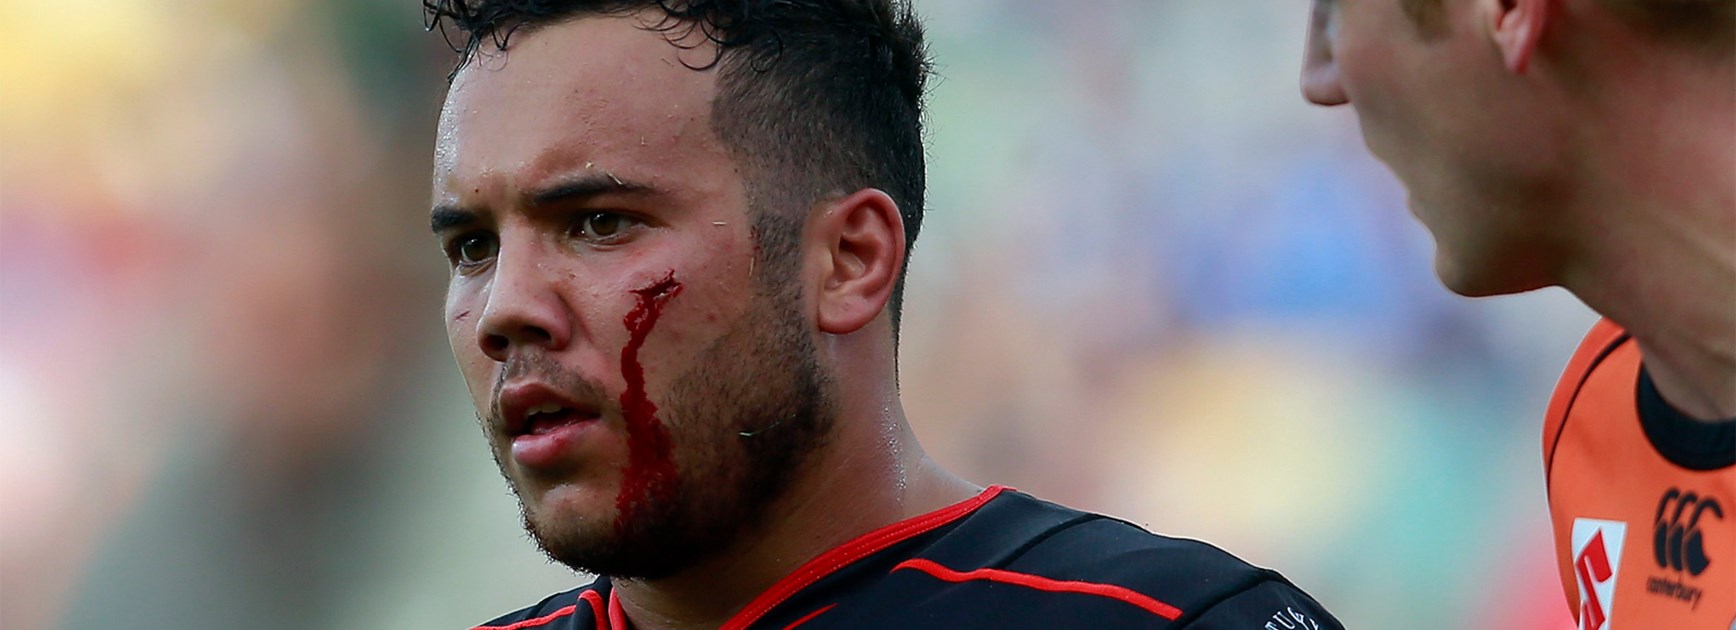 He was battered and bruised but Jazz Tevaga made an impressive debut for the Warriors against Melbourne.